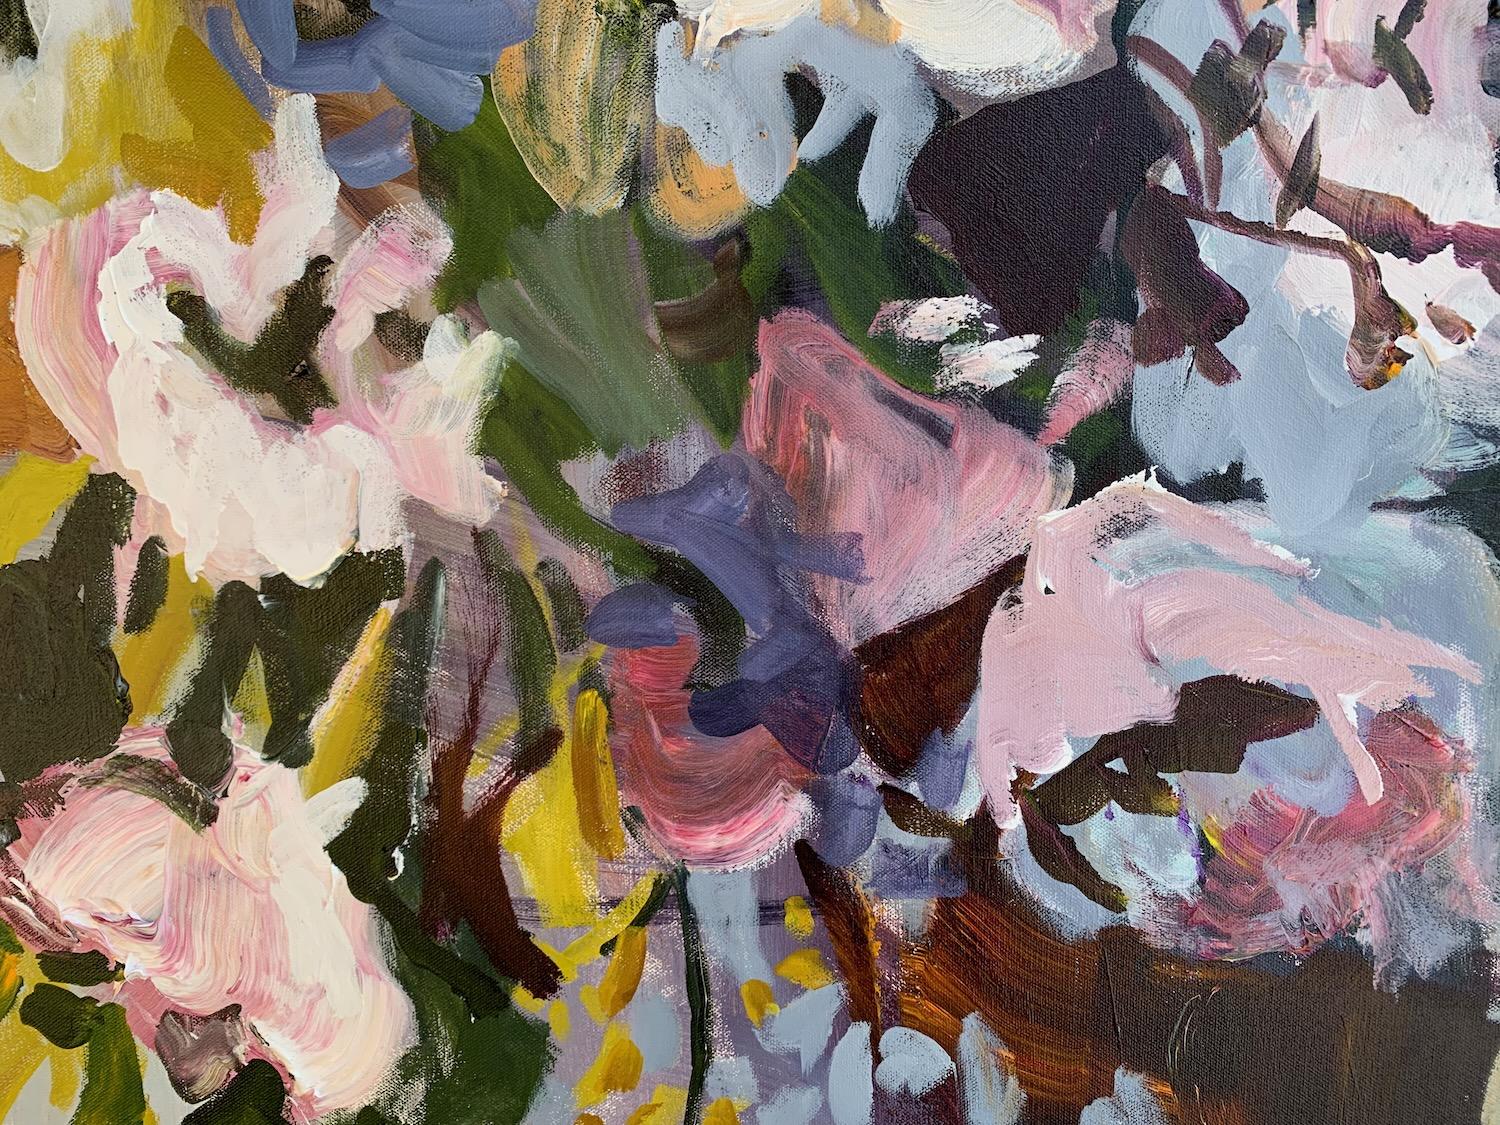 <p>Artist Comments<br>Artist Julia Hacker presents a dreamy floral painting marked by flowing gestural paintwork. Subtle pastel contrasts in the background allow for the more pronounced hues in the foreground to come through. 